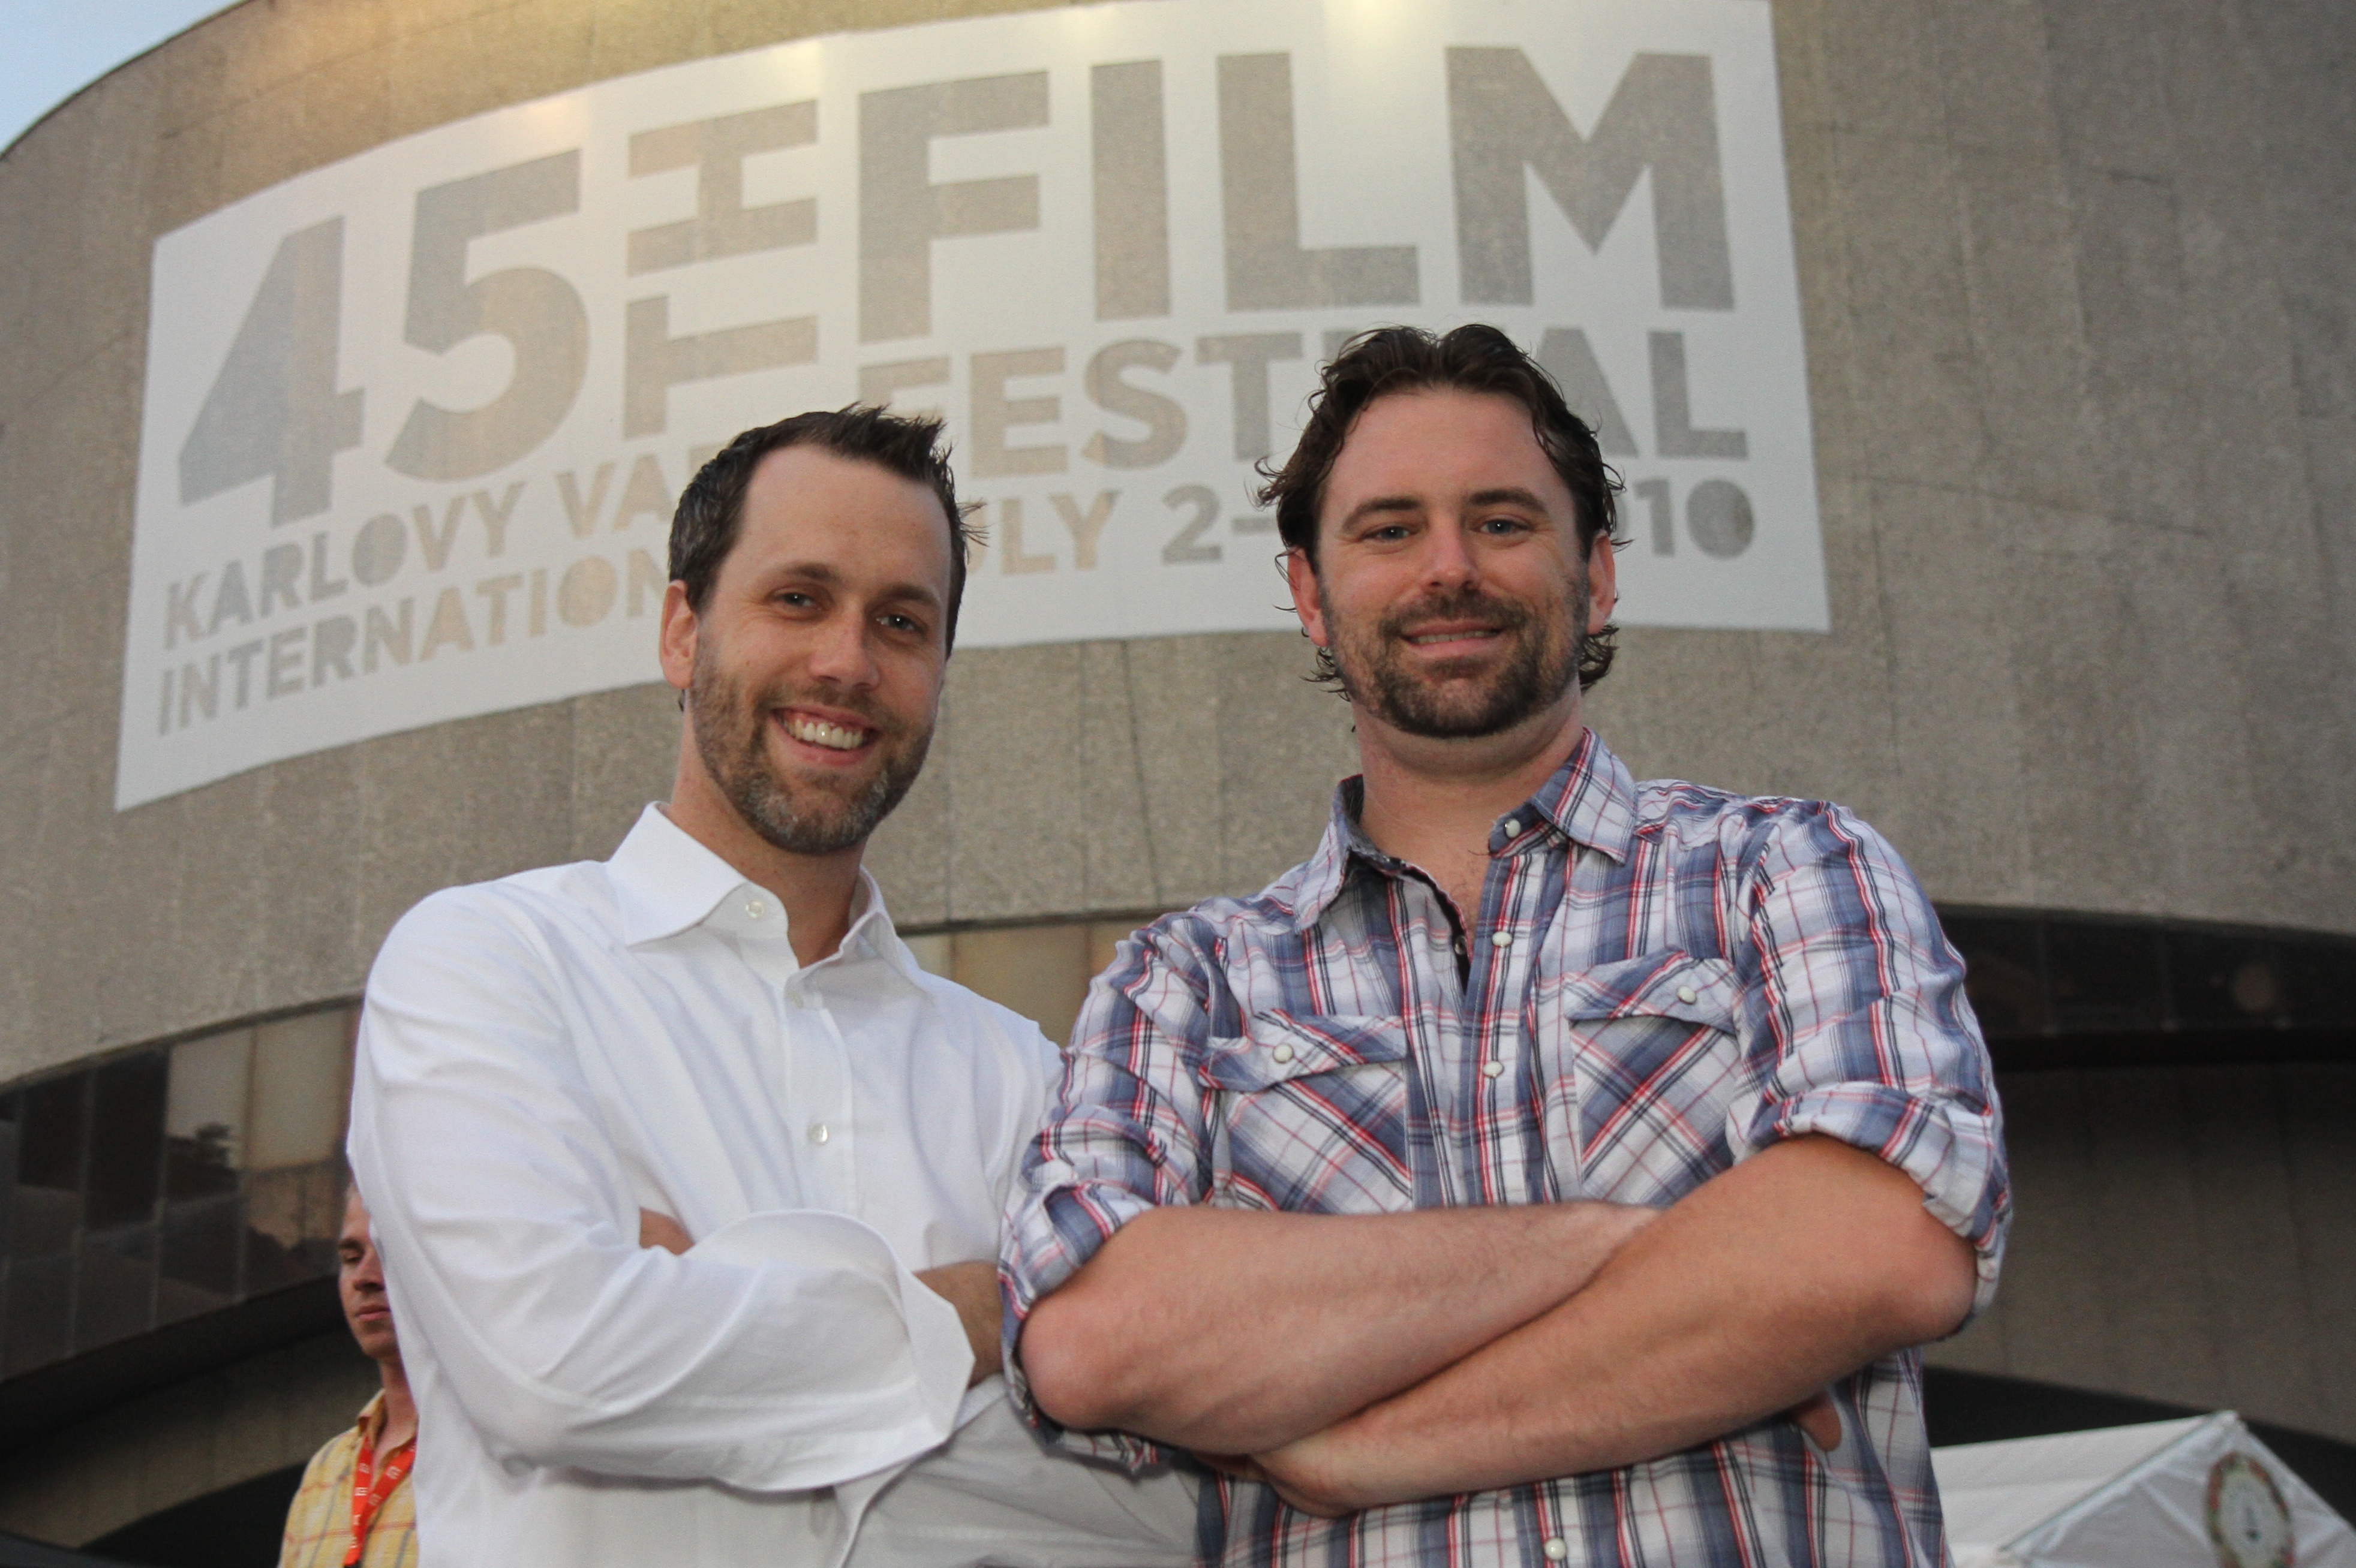 Actor/Co-Writer David Crane and Director/Co-Writer Quinn Saunders at the 45th Annual Karlovy Vary International Film Festival.